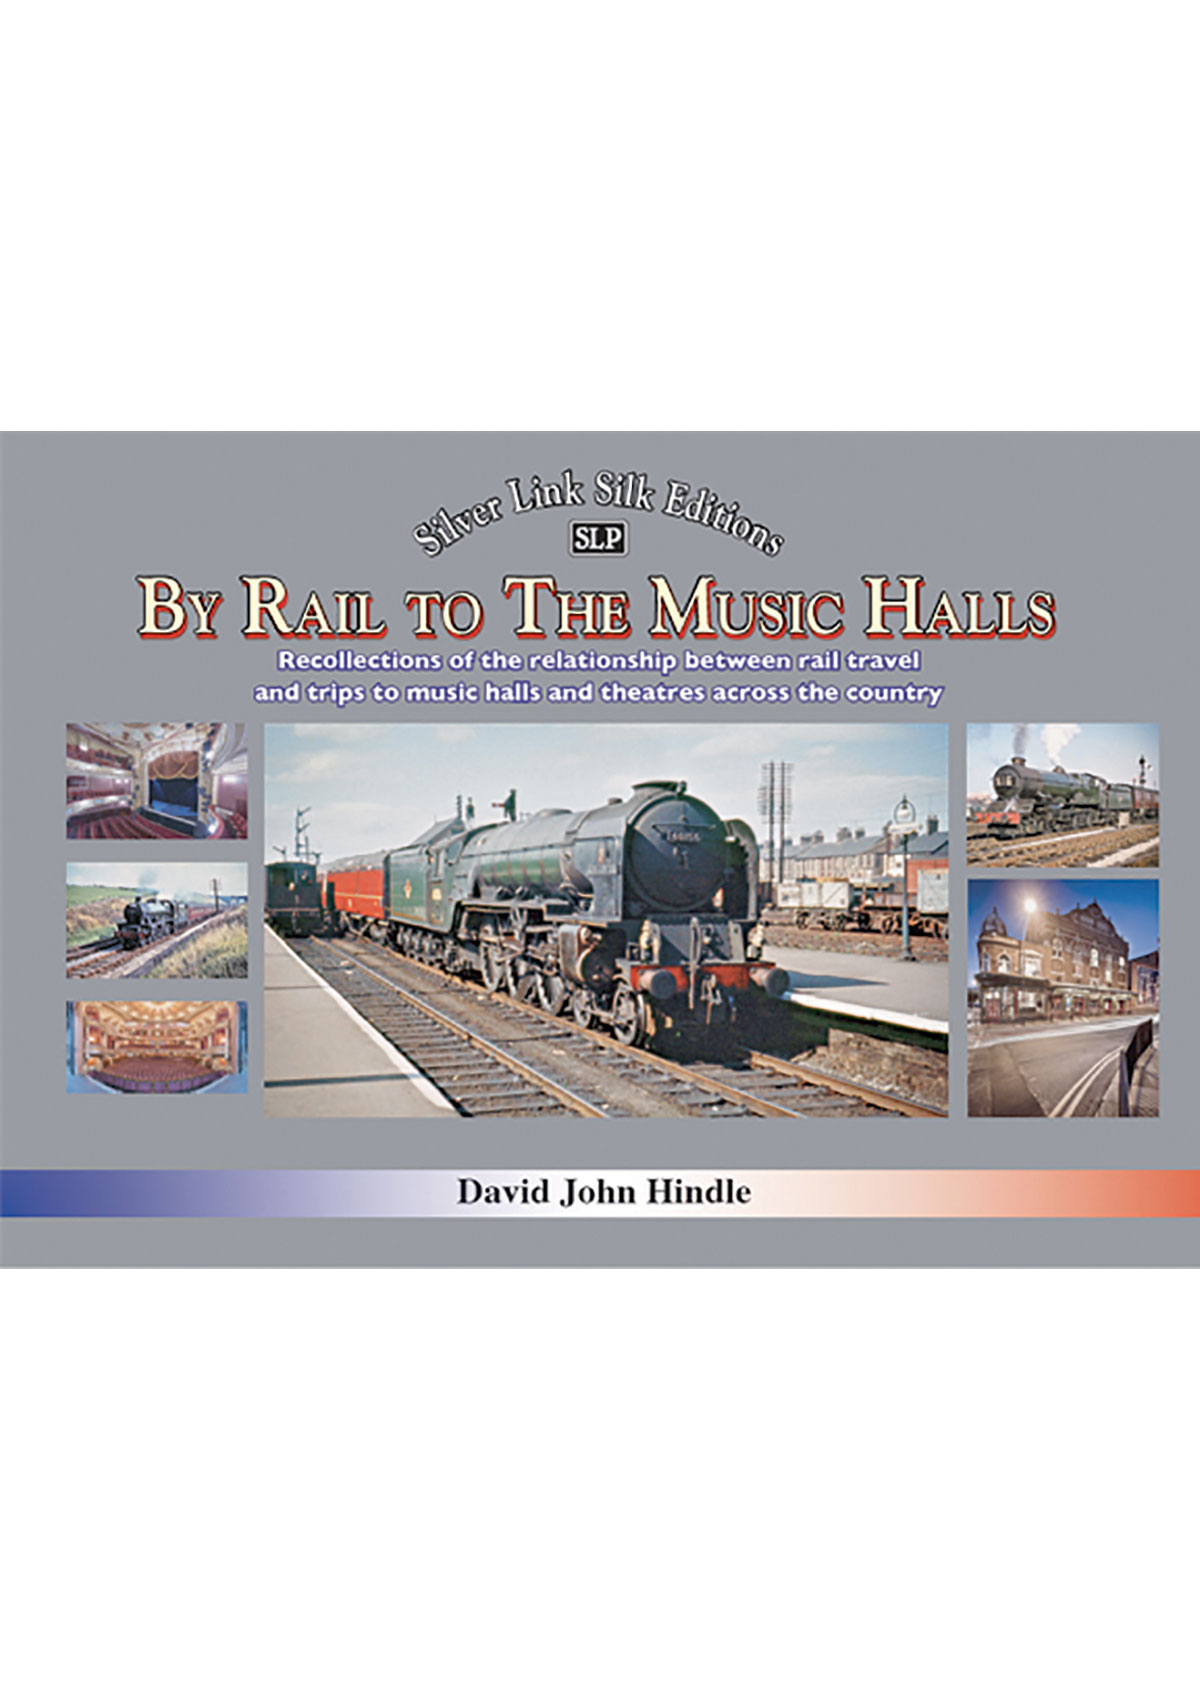 By Rail to the Music Halls. Stock at Bestsellers warehouse.